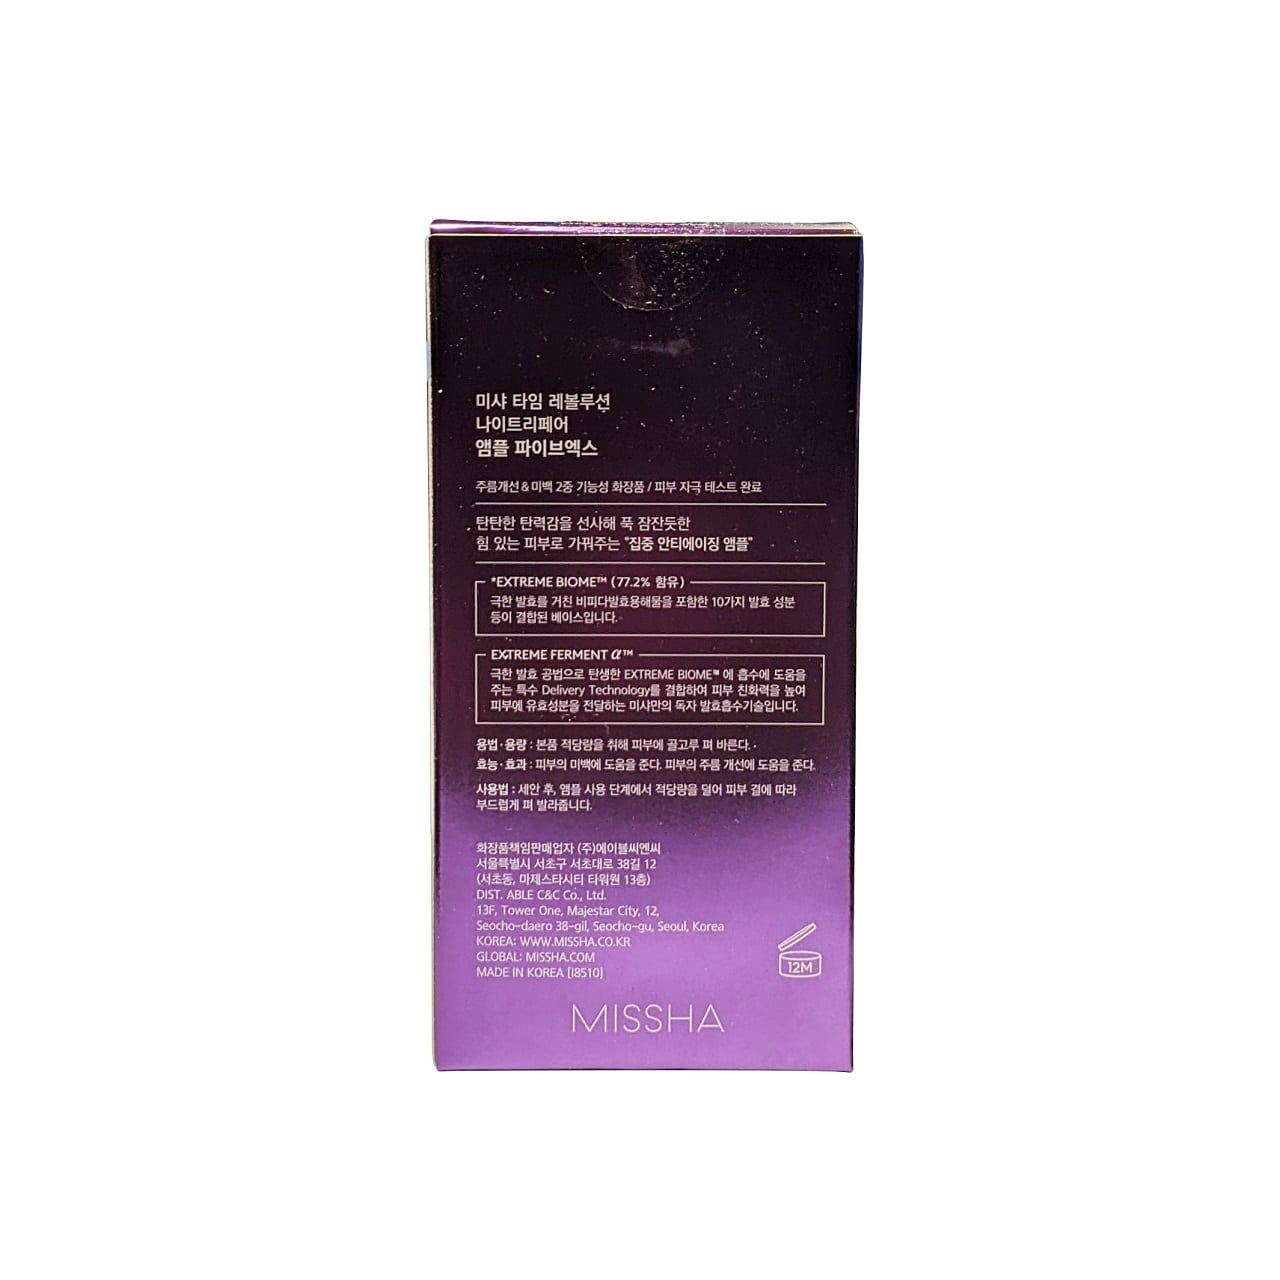 Directions and caution for MISSHA Time Revolution Night Ampoule 5X (50 mL) in Korean